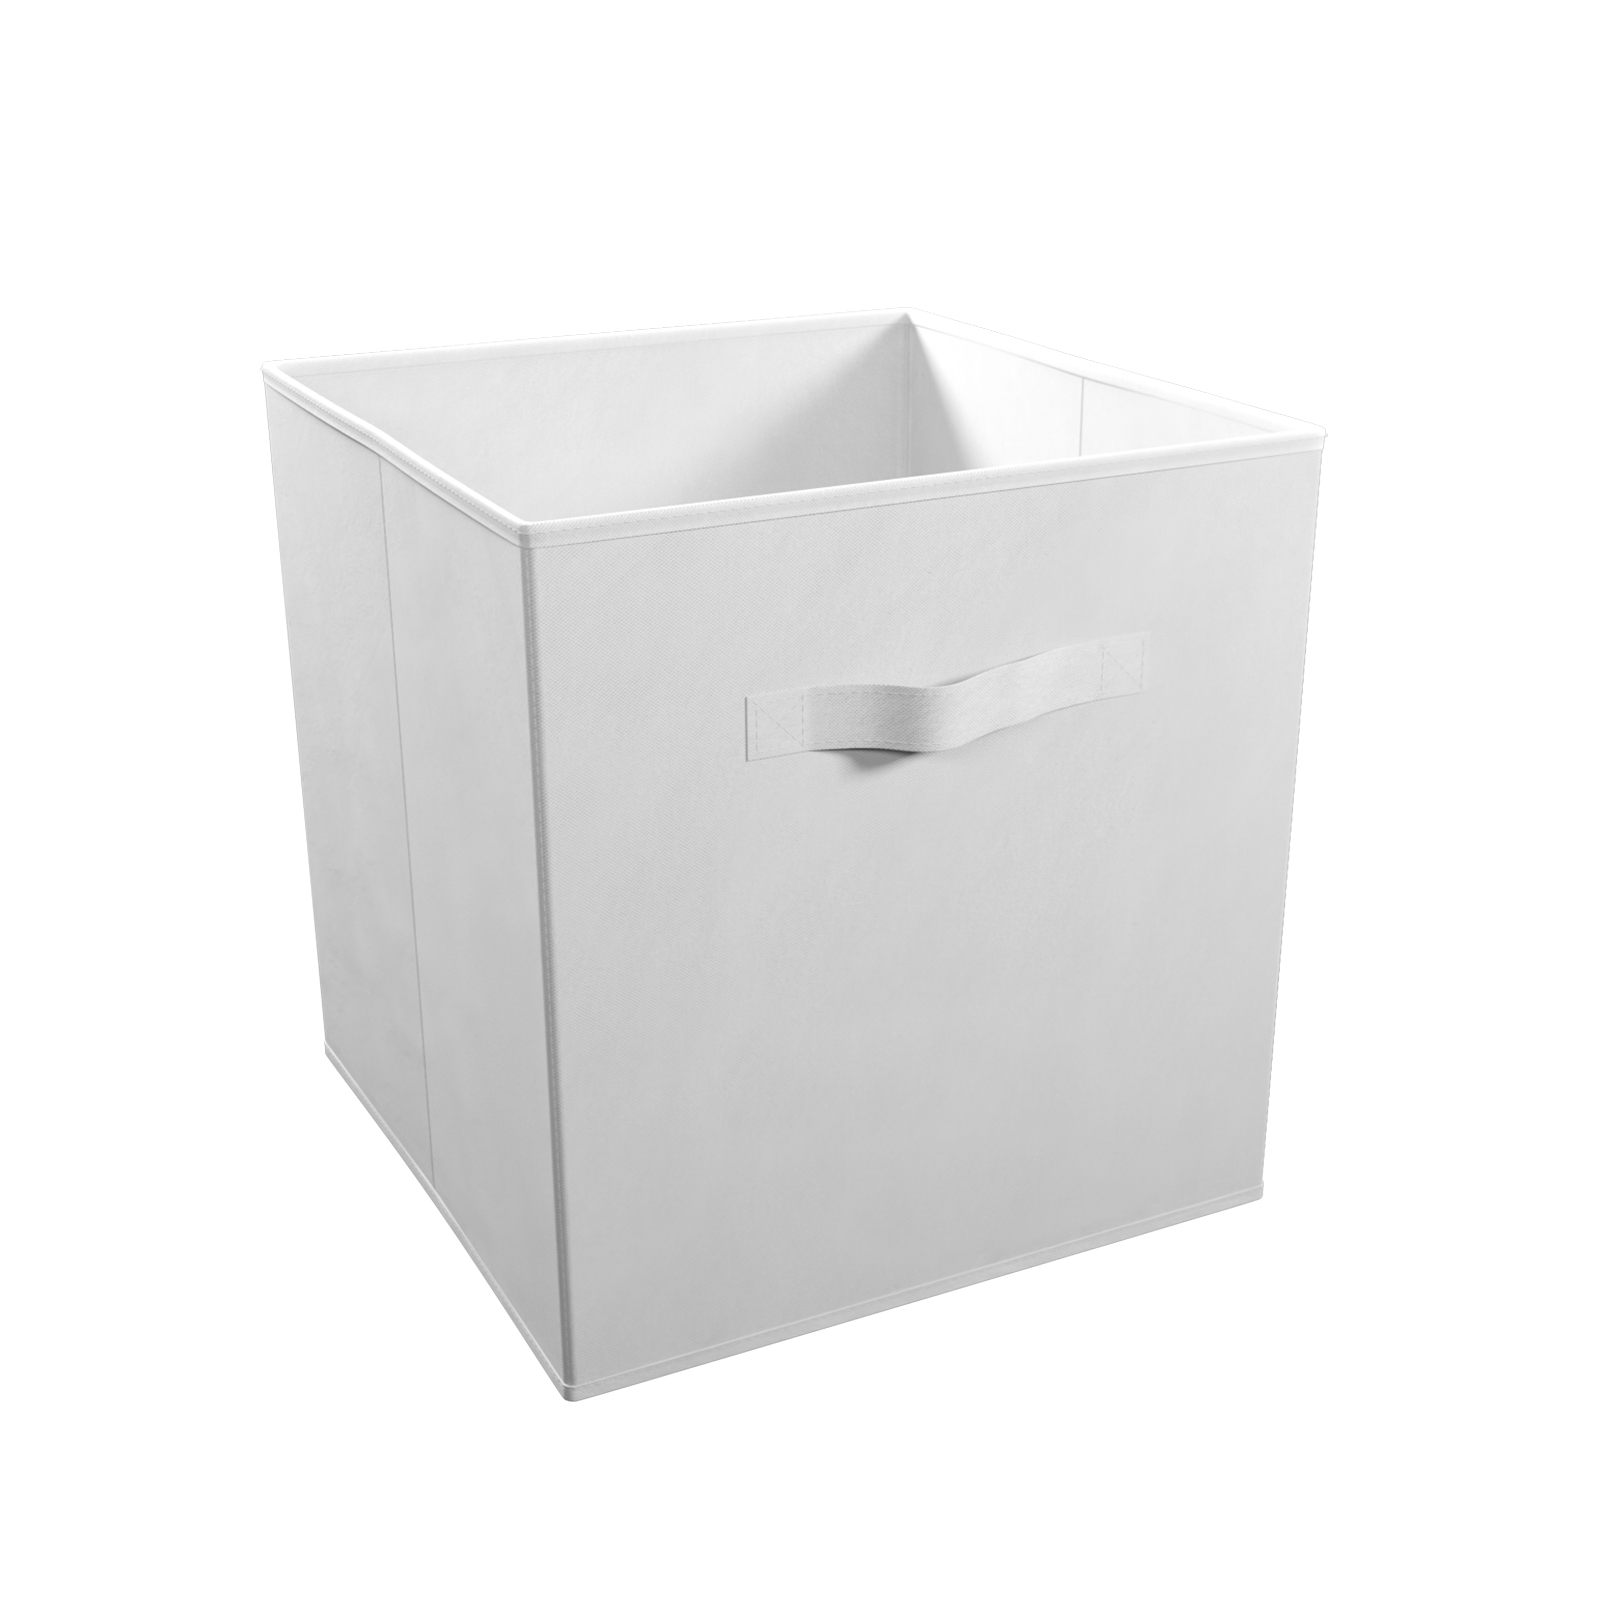 Clever Cube Compact Fabric Insert White